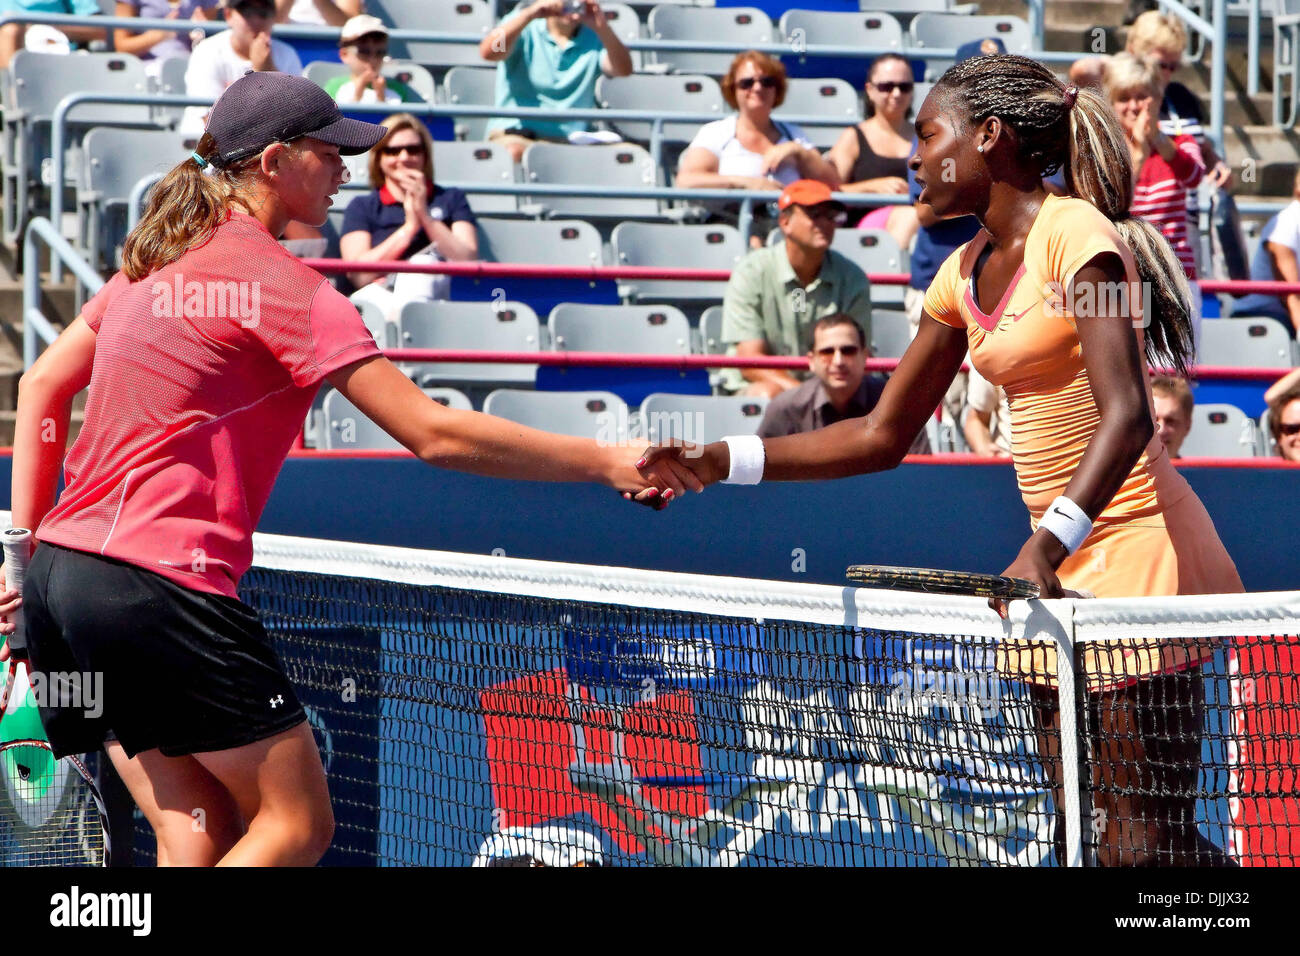 Aug. 20, 2010 - Montreal, Quebec, Canada - EVENGELINE REPIC (L) shakes hands with FRANCOISE ABANDA (R) at the end of the Girl's Under 16 National Championship at  Uniprix Stadium in Montreal, Quebec, Canada. ABANDA won, 6-2, 6-1. (Credit Image: © Leon Switzer/Southcreek Global/ZUMApress.com) Stock Photo